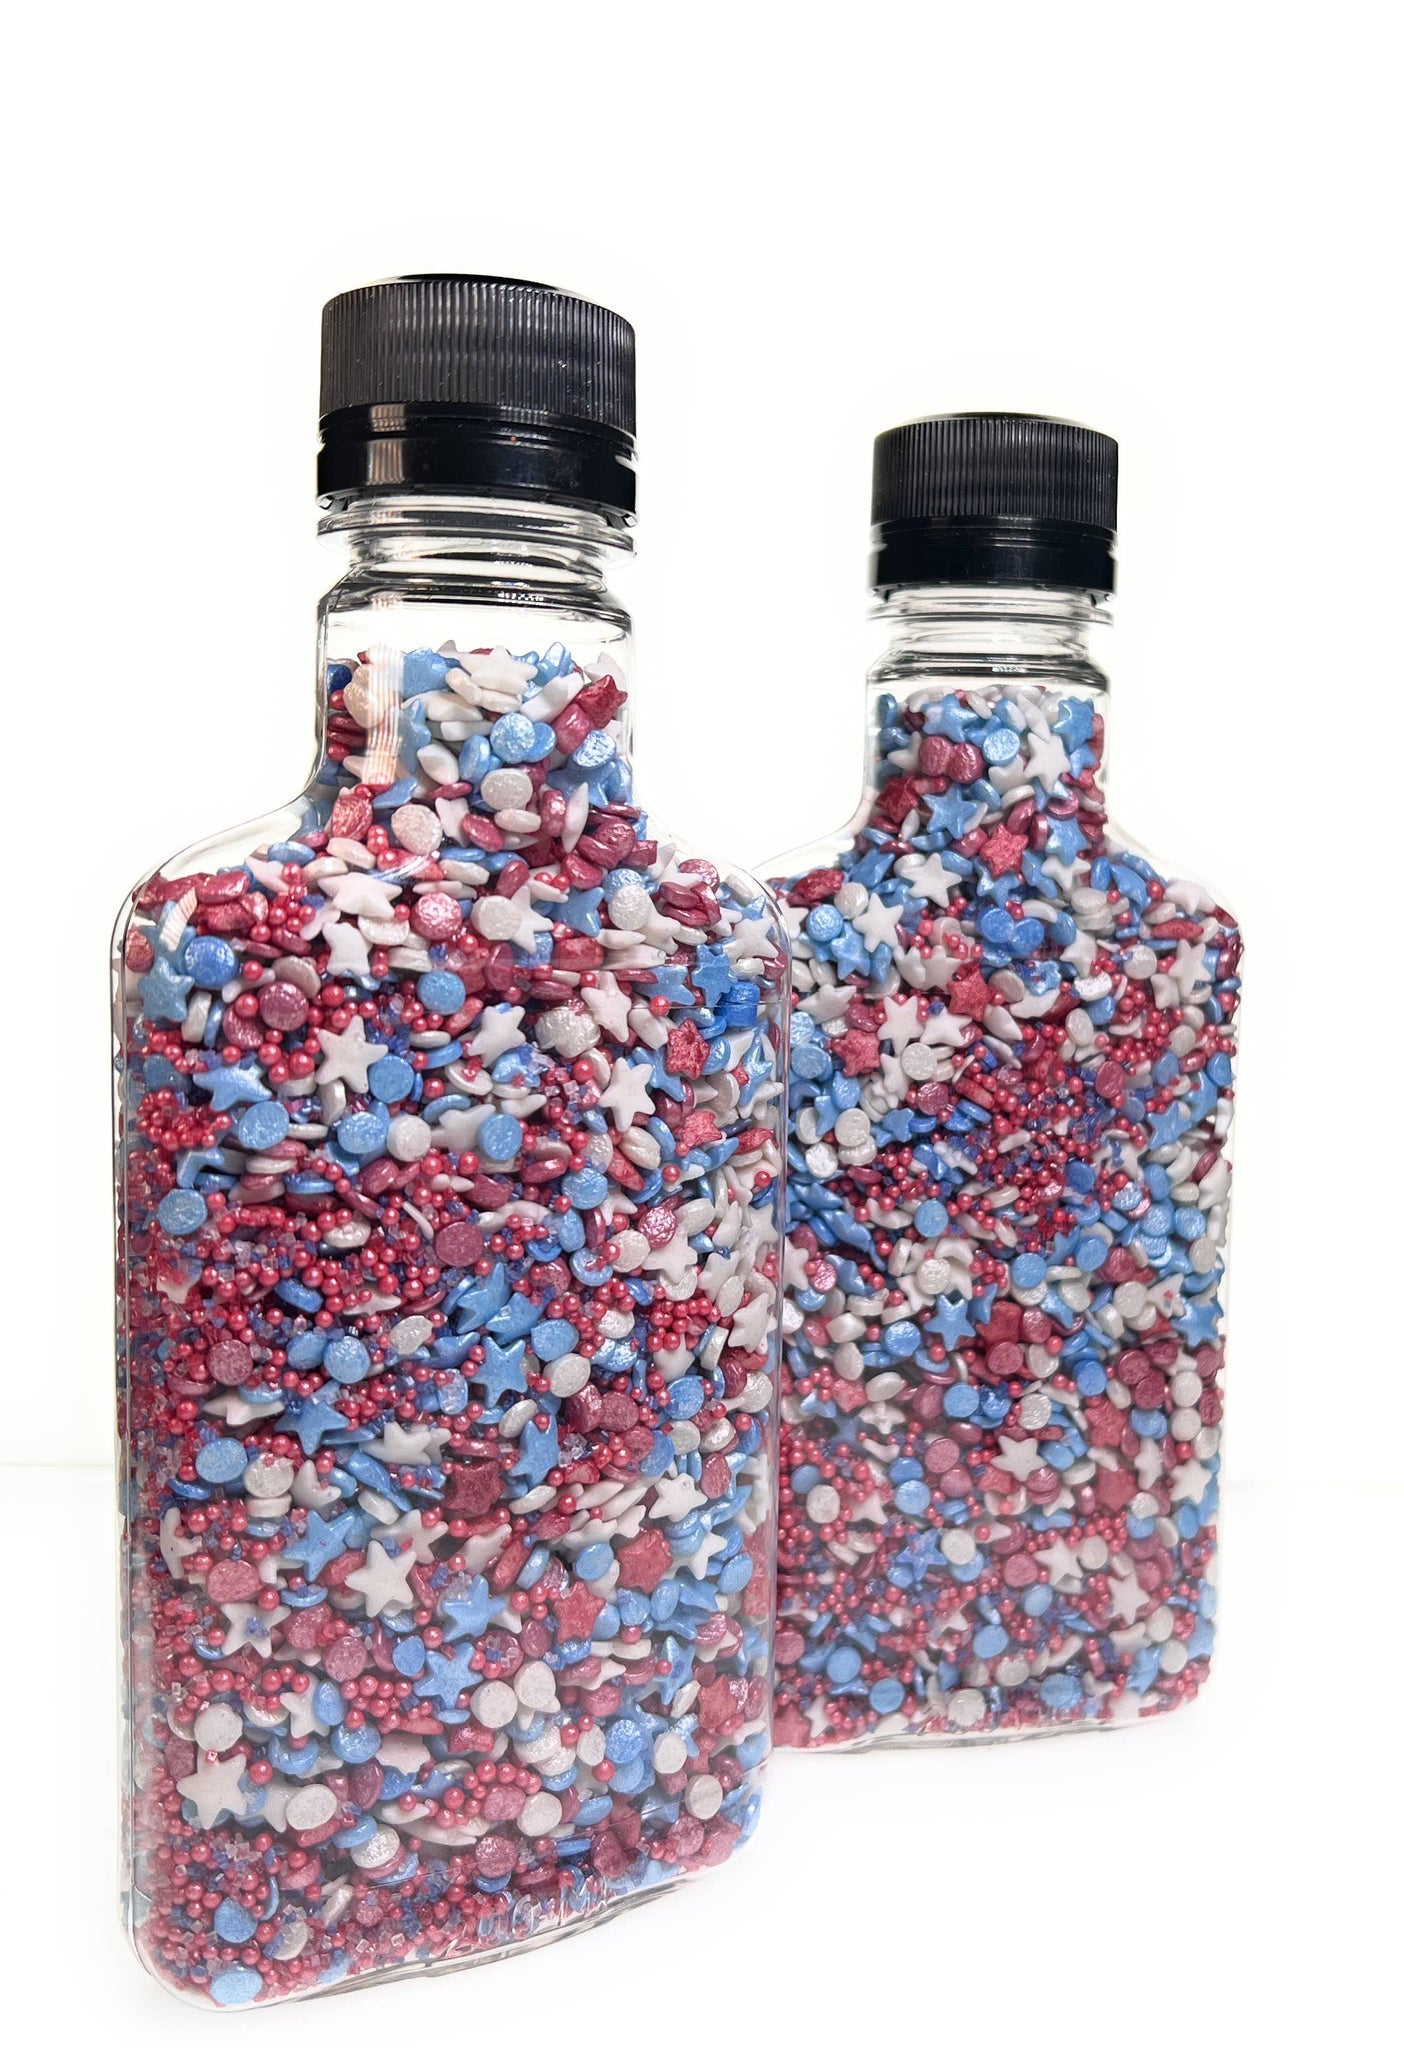 Snowy River Independence Cocktail Confetti